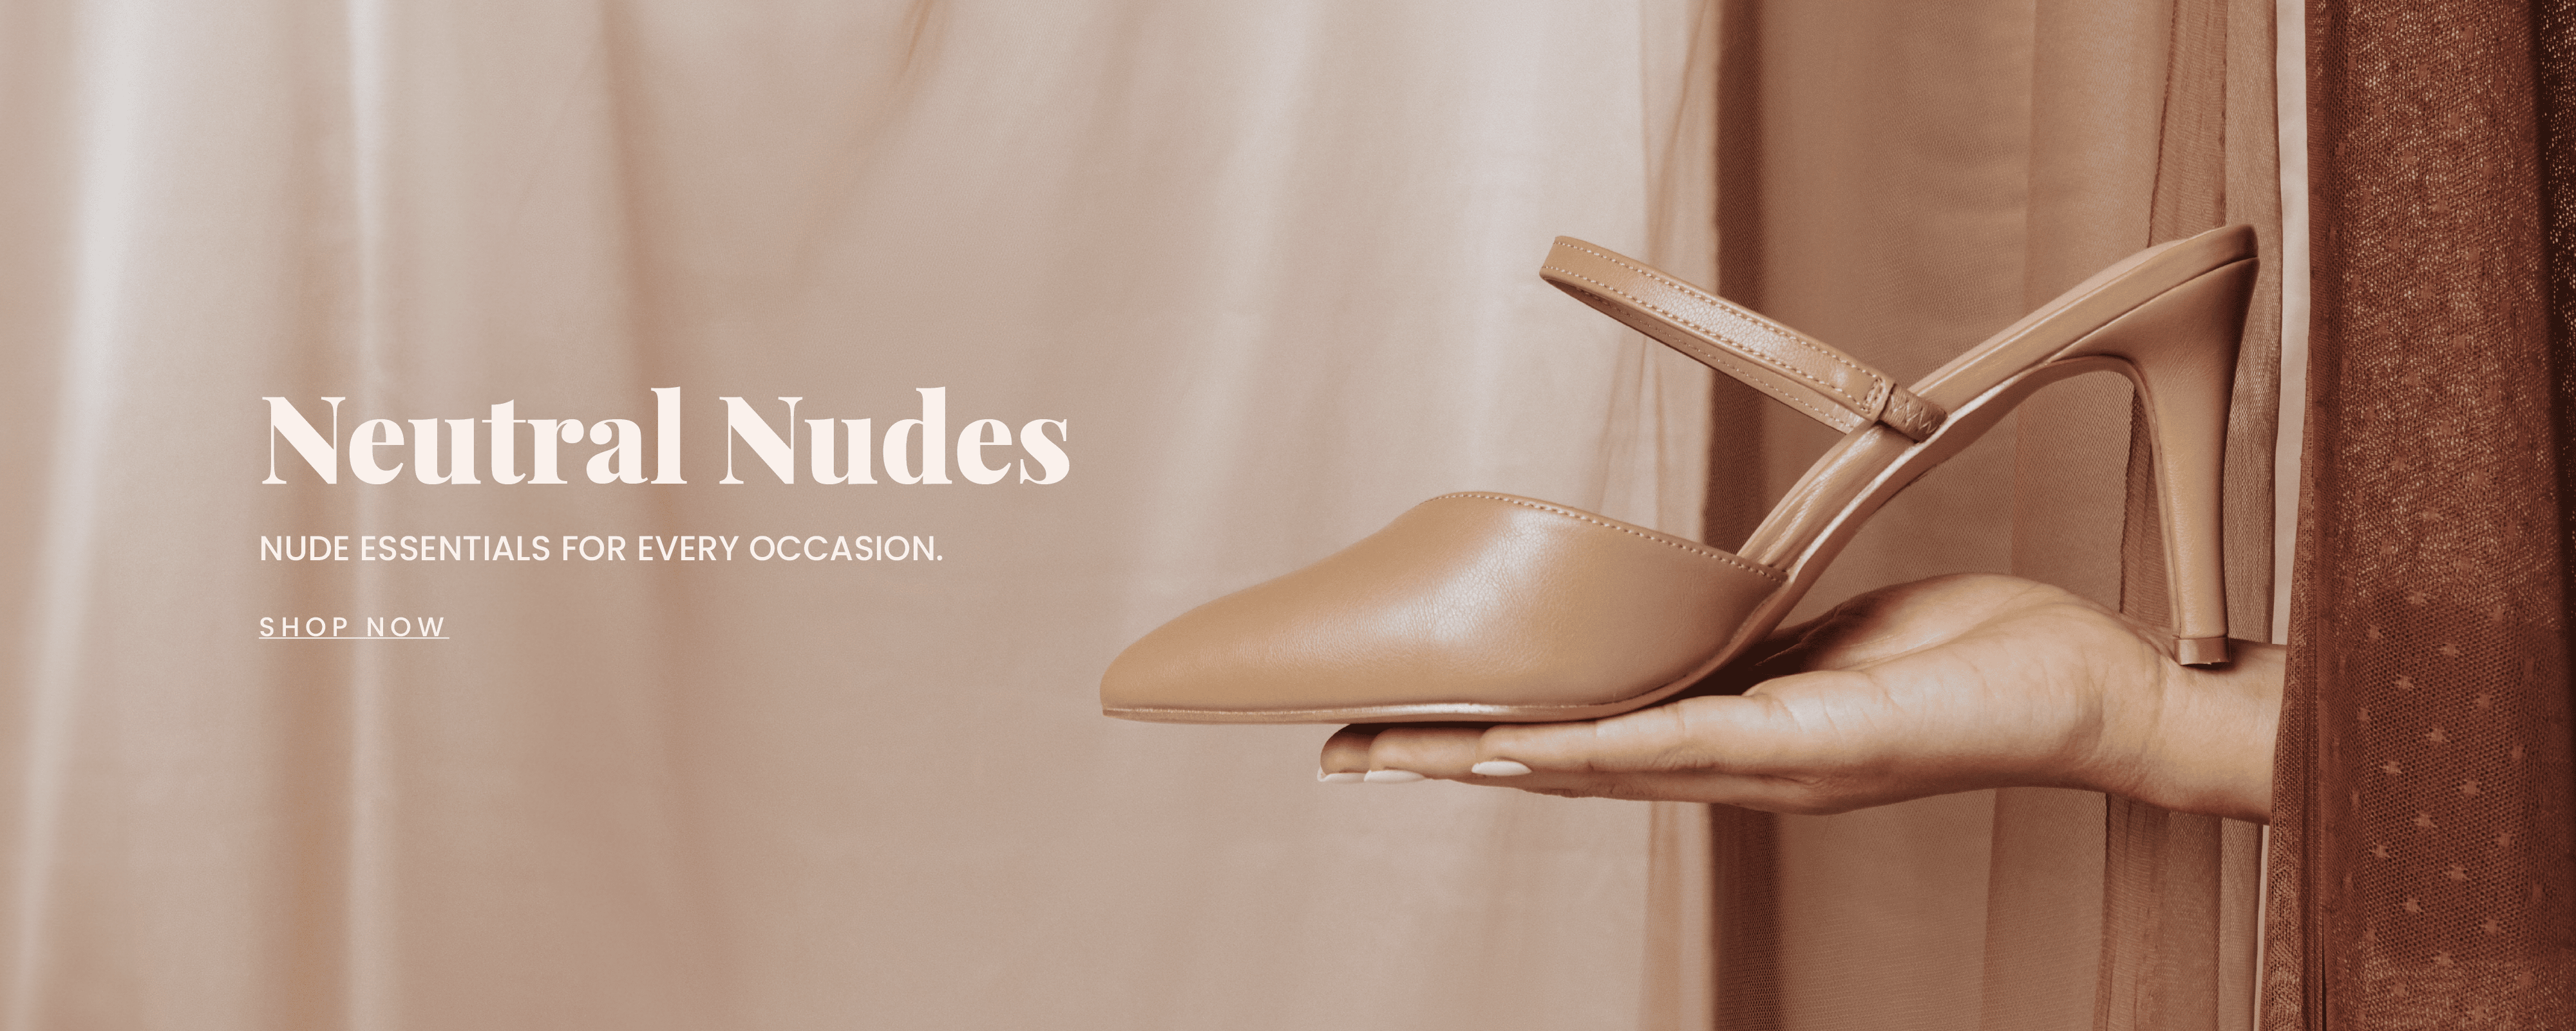 "Neutral Nudes" text next to the hand of a model holding a pointed toe backless stiletto heel in nude. "Shop Now" Call to action button.